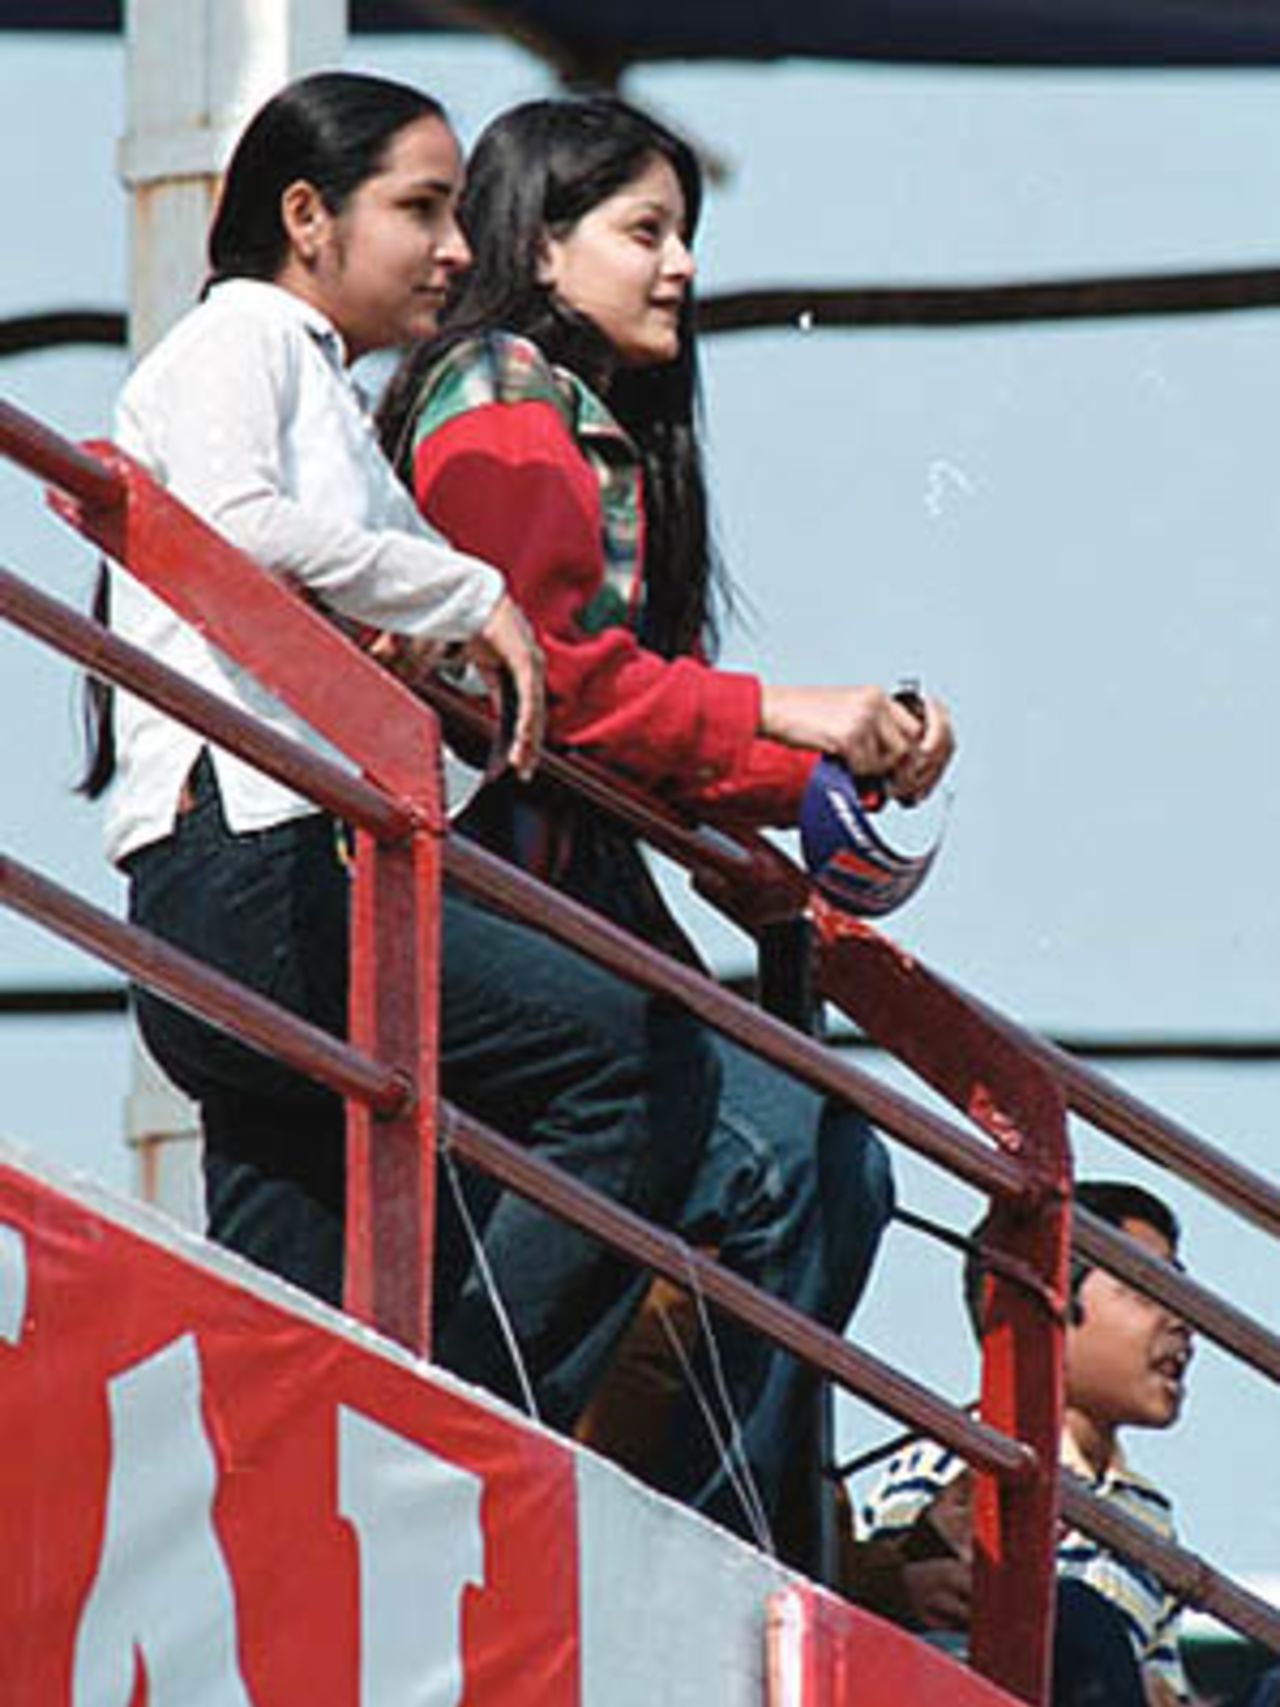 A couple of supporters closely following the game, Zimbabwe in India, 2000/01, 2nd Test, India v Zimbabwe, Vidarbha C.A. Ground, Nagpur, 25-29 November 2000 (Day 4).